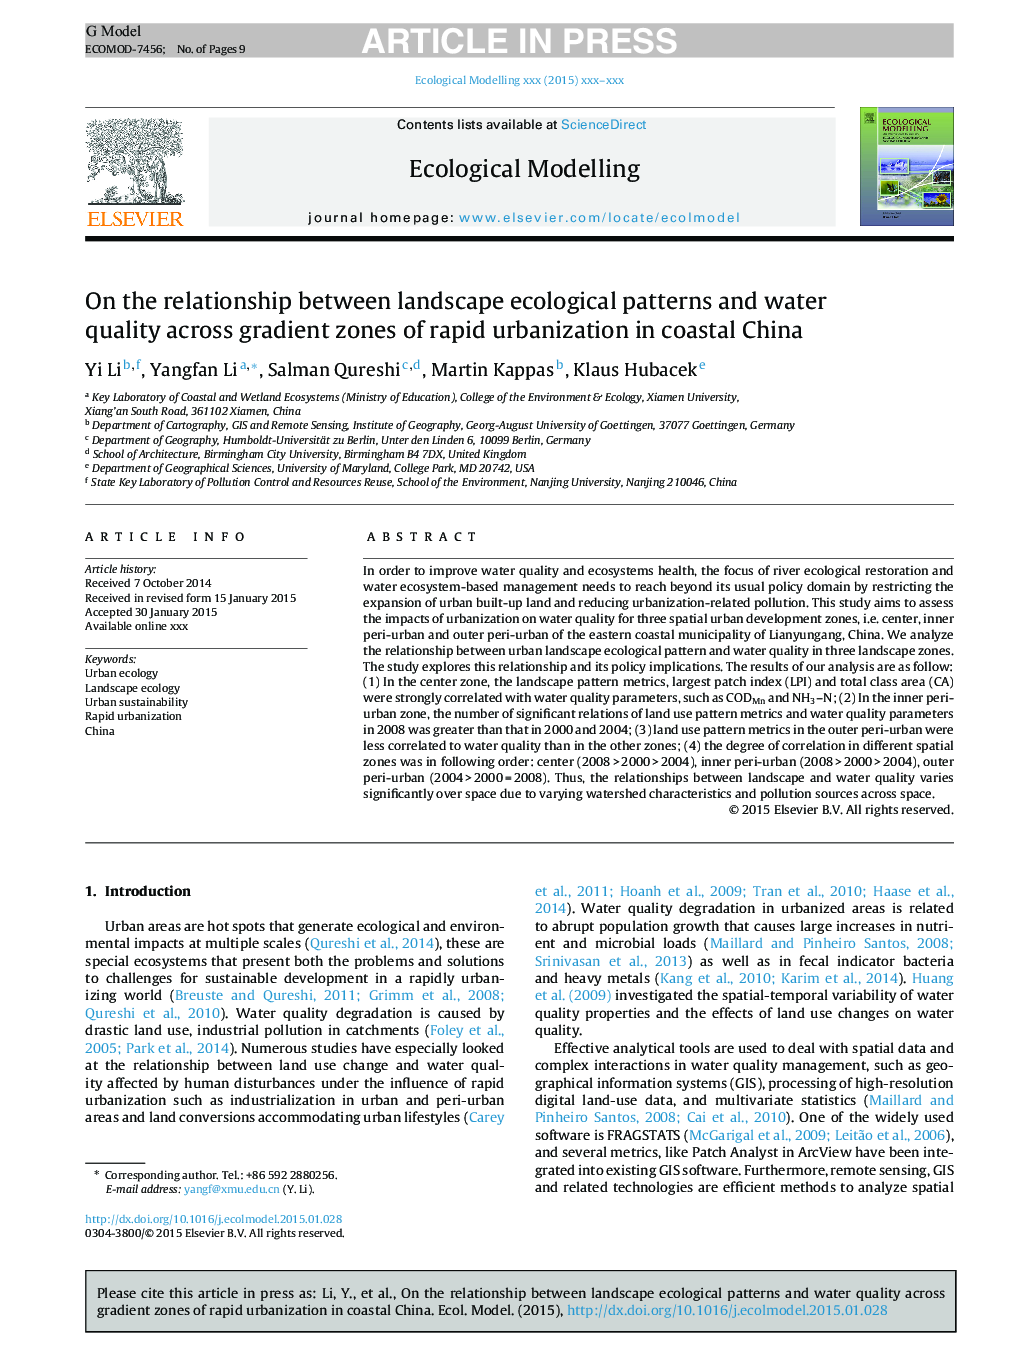 On the relationship between landscape ecological patterns and water quality across gradient zones of rapid urbanization in coastal China